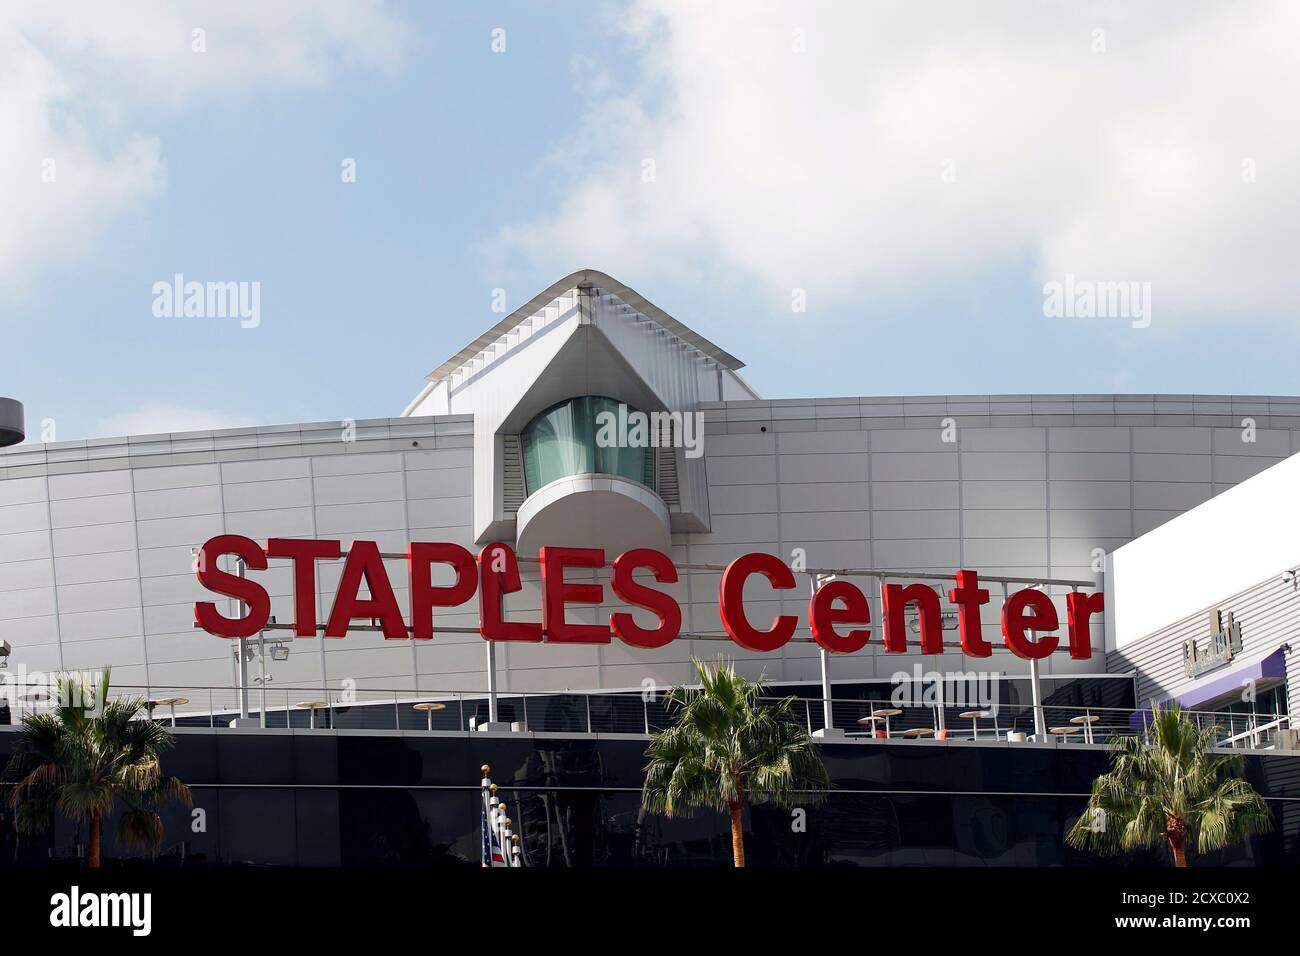 The Staples center is pictured in Los Angeles, California October 9, 2012. Billionaire Phil Anschutz has kicked off the auction of his Anschutz Entertainment Group, with an expectation that the sports and entertainment giant should draw bids in the $10 billion range, higher than previously believed, according to sources familiar with the situation. One of the sources said, the Staples Center in Los Angeles alone could be worth around $1 billion. REUTERS/Mario Anzuoni (UNITED STATES - Tags: ENTERTAINMENT BUSINESS SPORT) Stock Photo